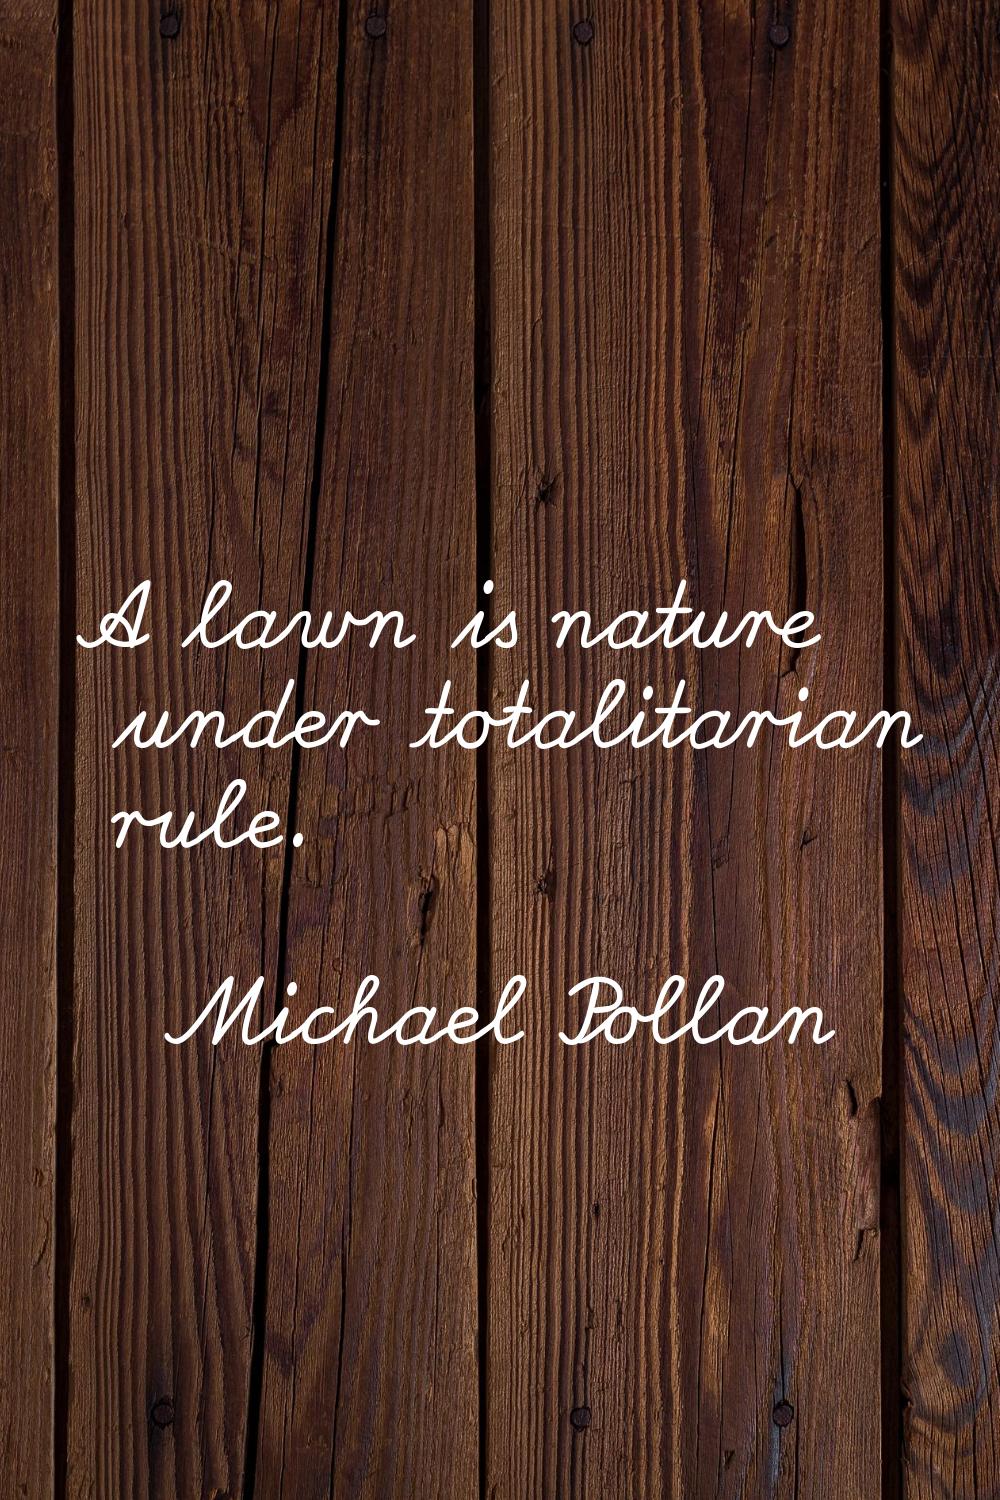 A lawn is nature under totalitarian rule.